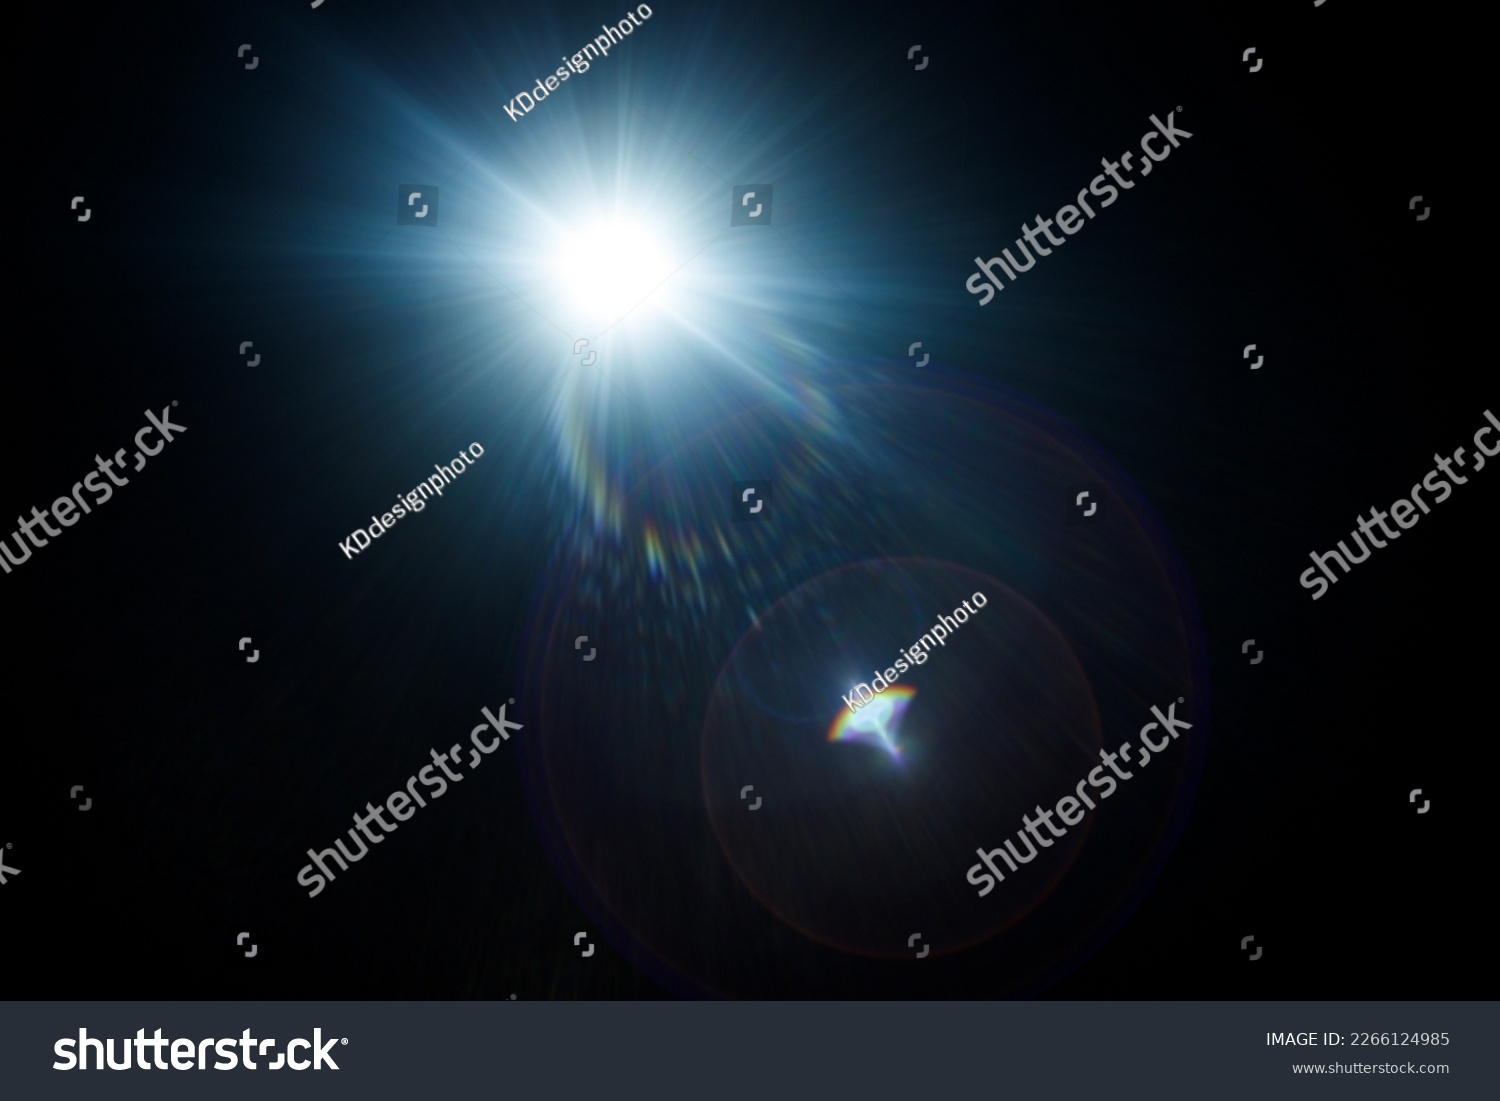 Easy to add lens flare effects for overlay designs or screen blending mode to make high-quality images. Abstract sun burst, digital flare, iridescent glare over black background. #2266124985